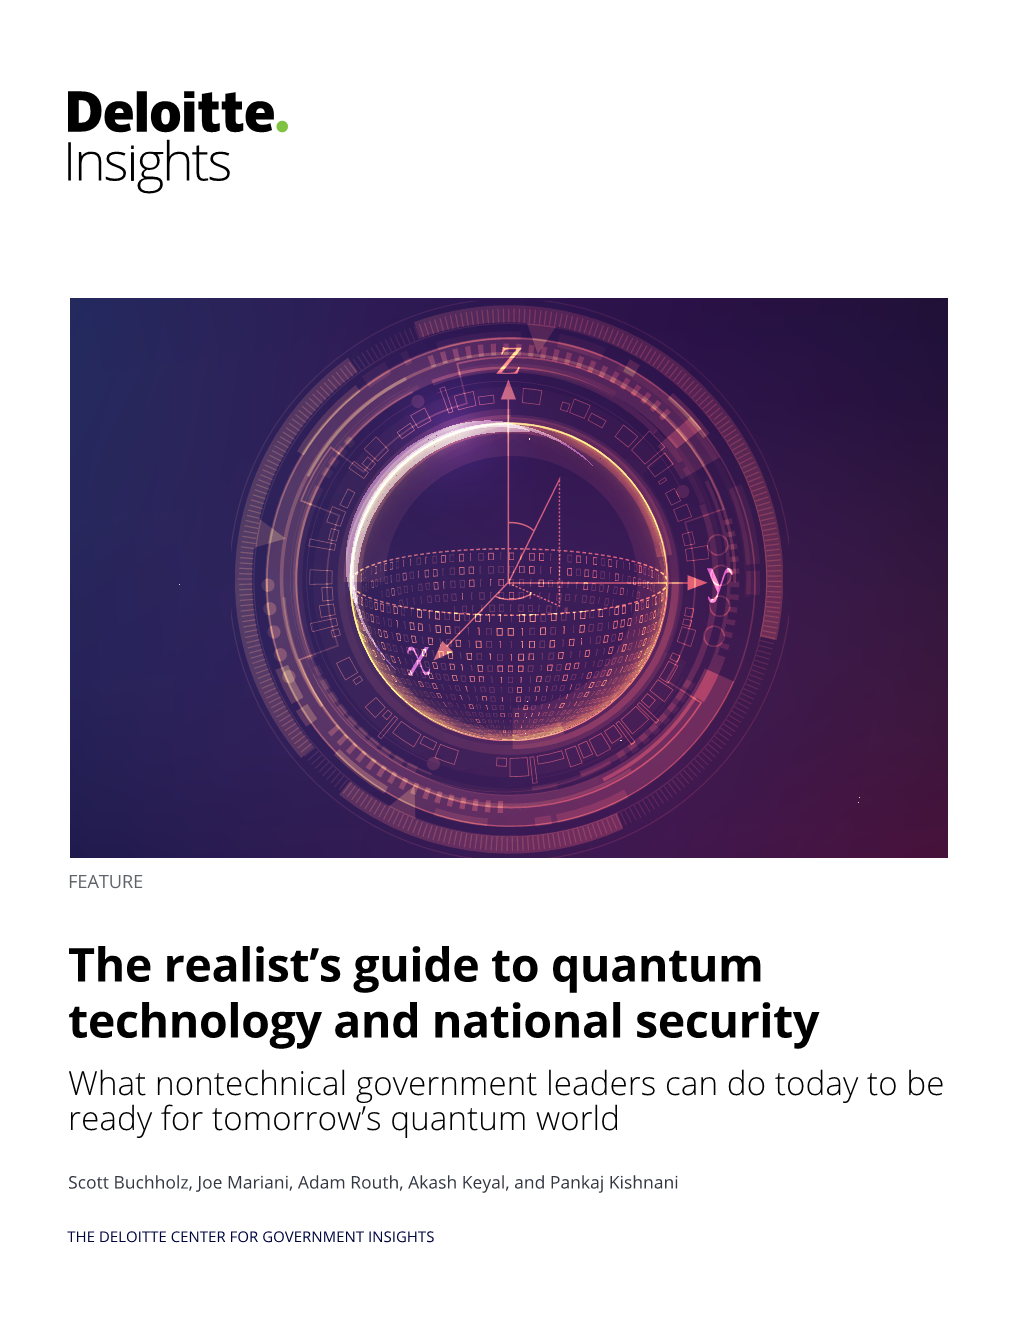 The Realist's Guide to Quantum Technology and National Security